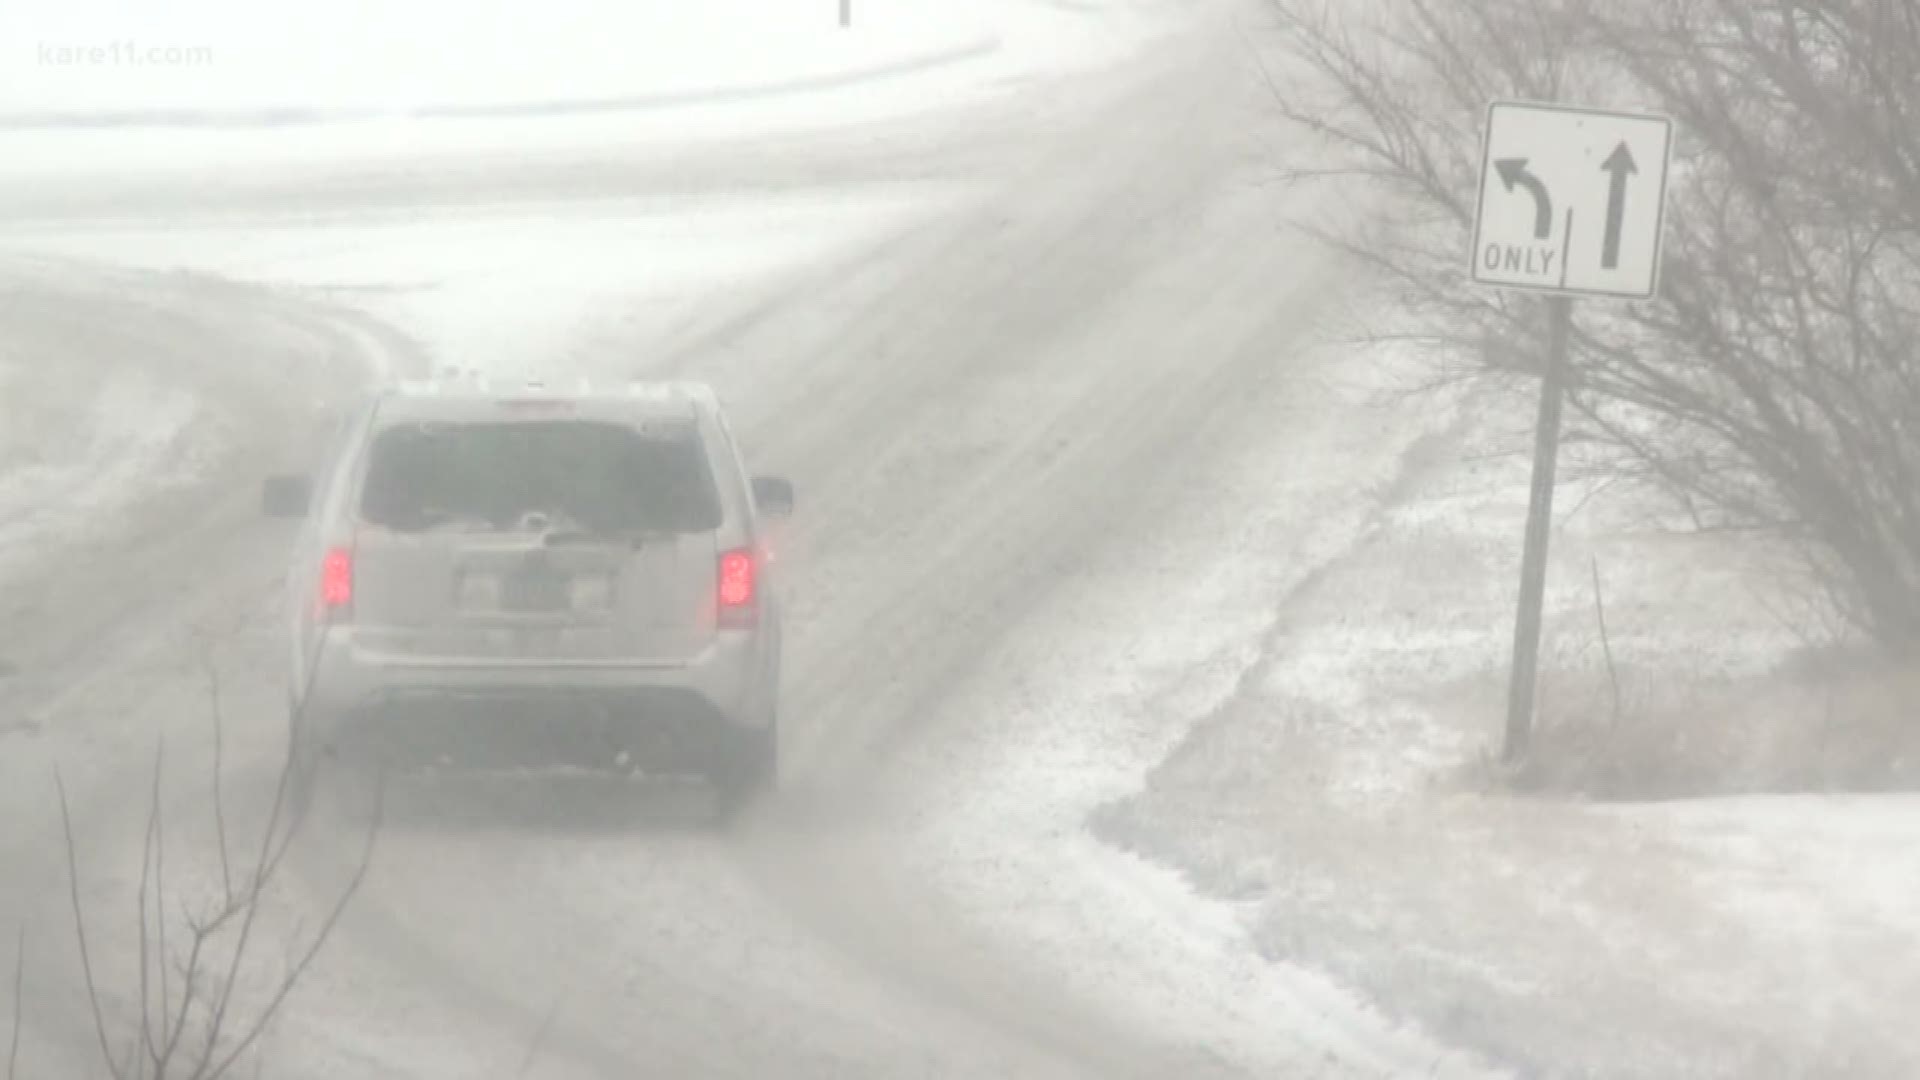 Lou Raguse reports on what MN-Dot is doing to treat the roads.